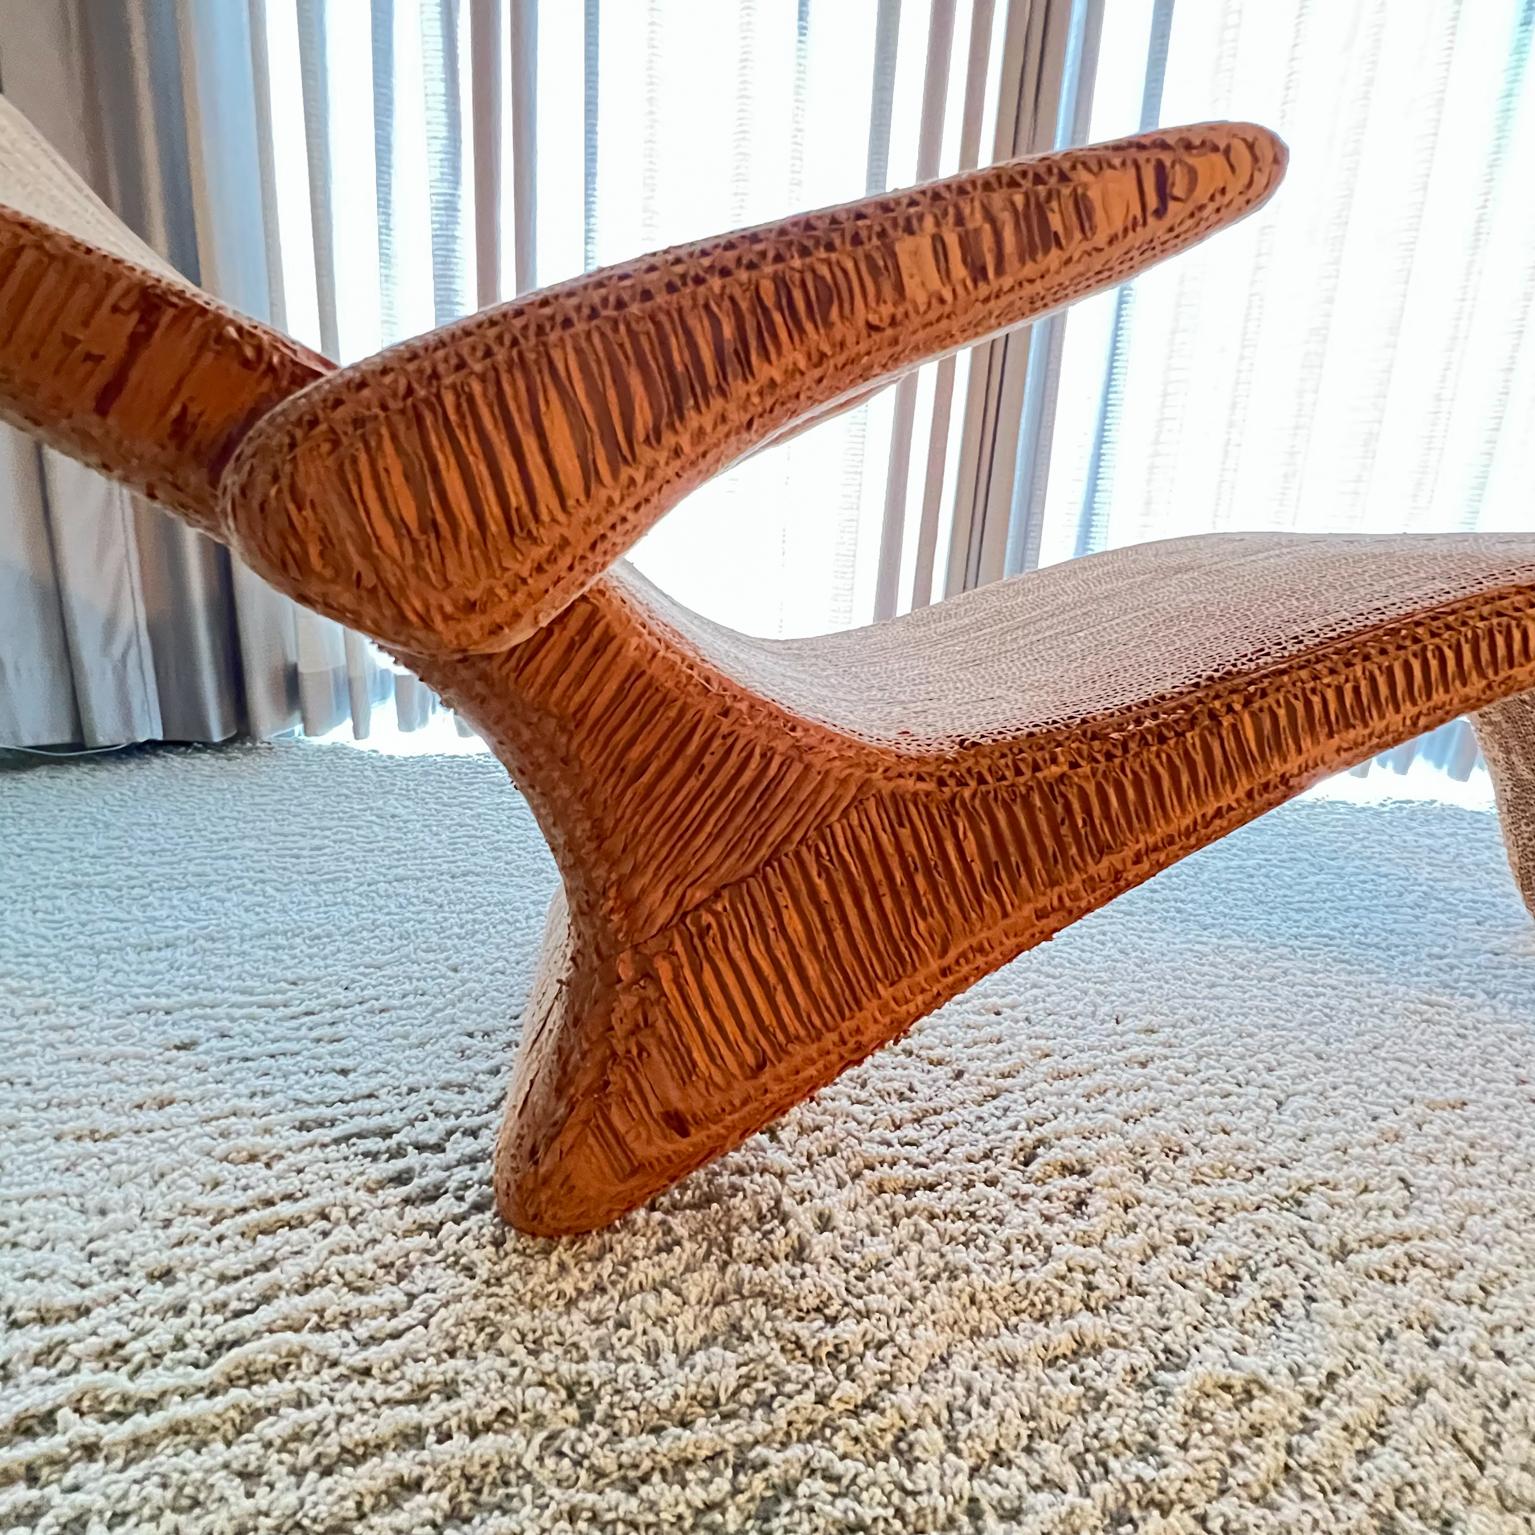  1970s Chaise Lounge LA Art Chair Style of Frank Gehry  For Sale 9